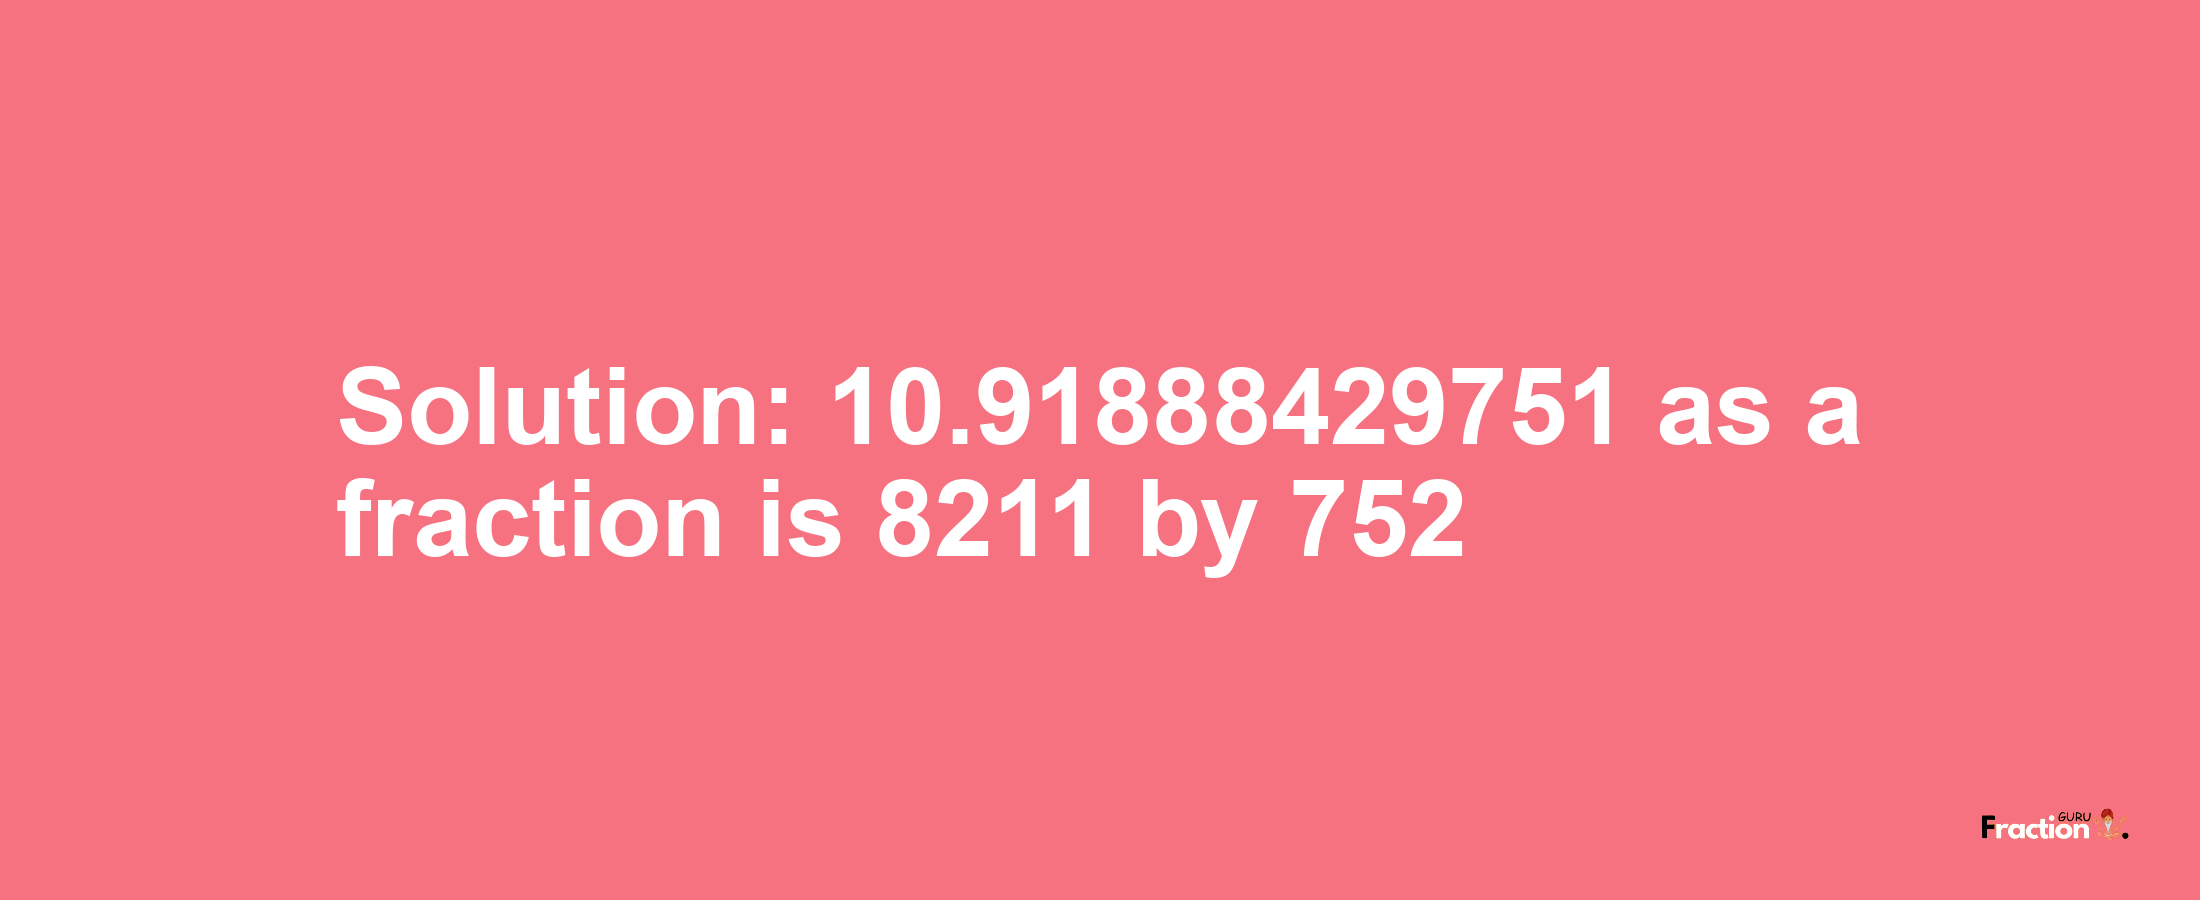 Solution:10.91888429751 as a fraction is 8211/752